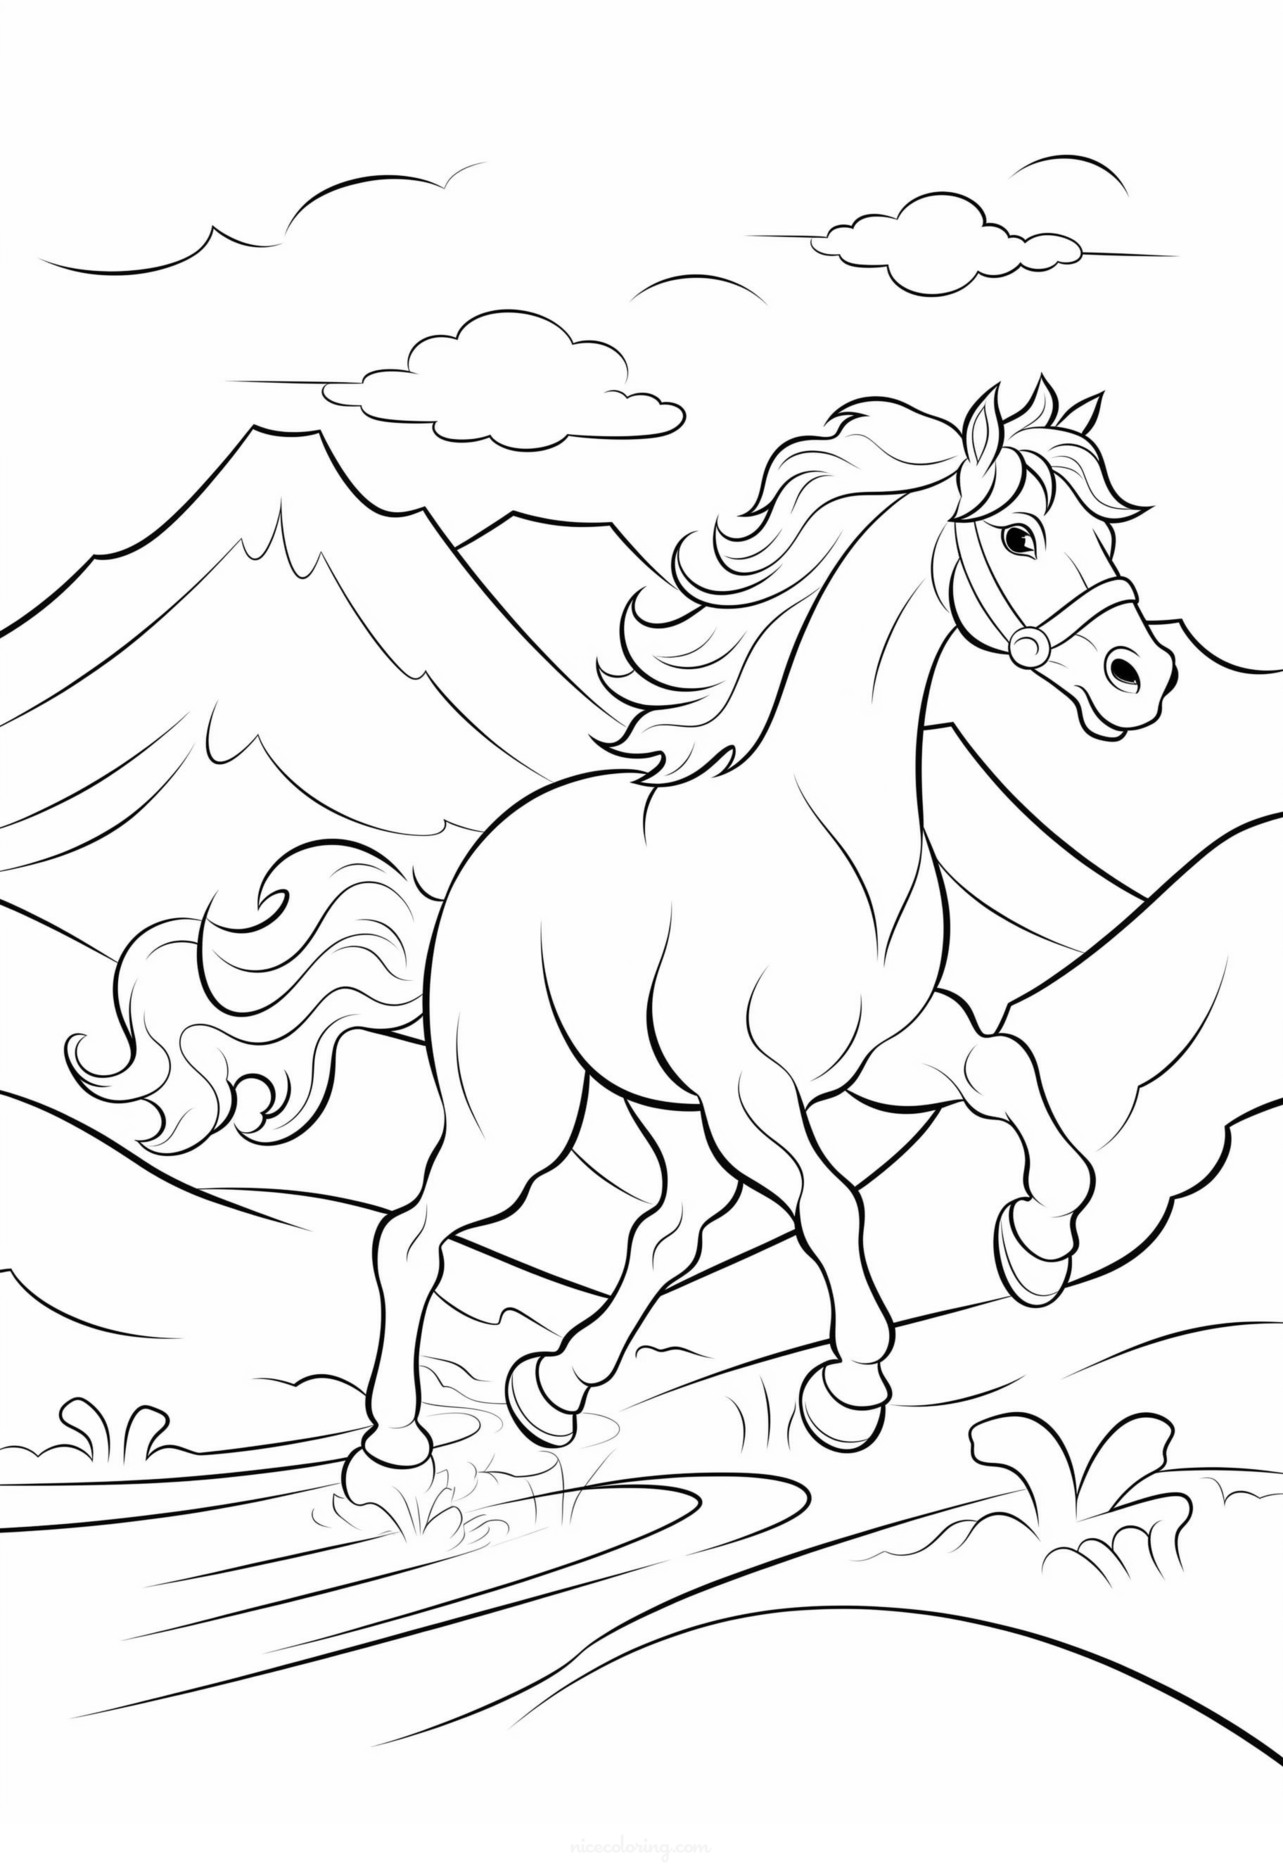 Horse standing in a field coloring